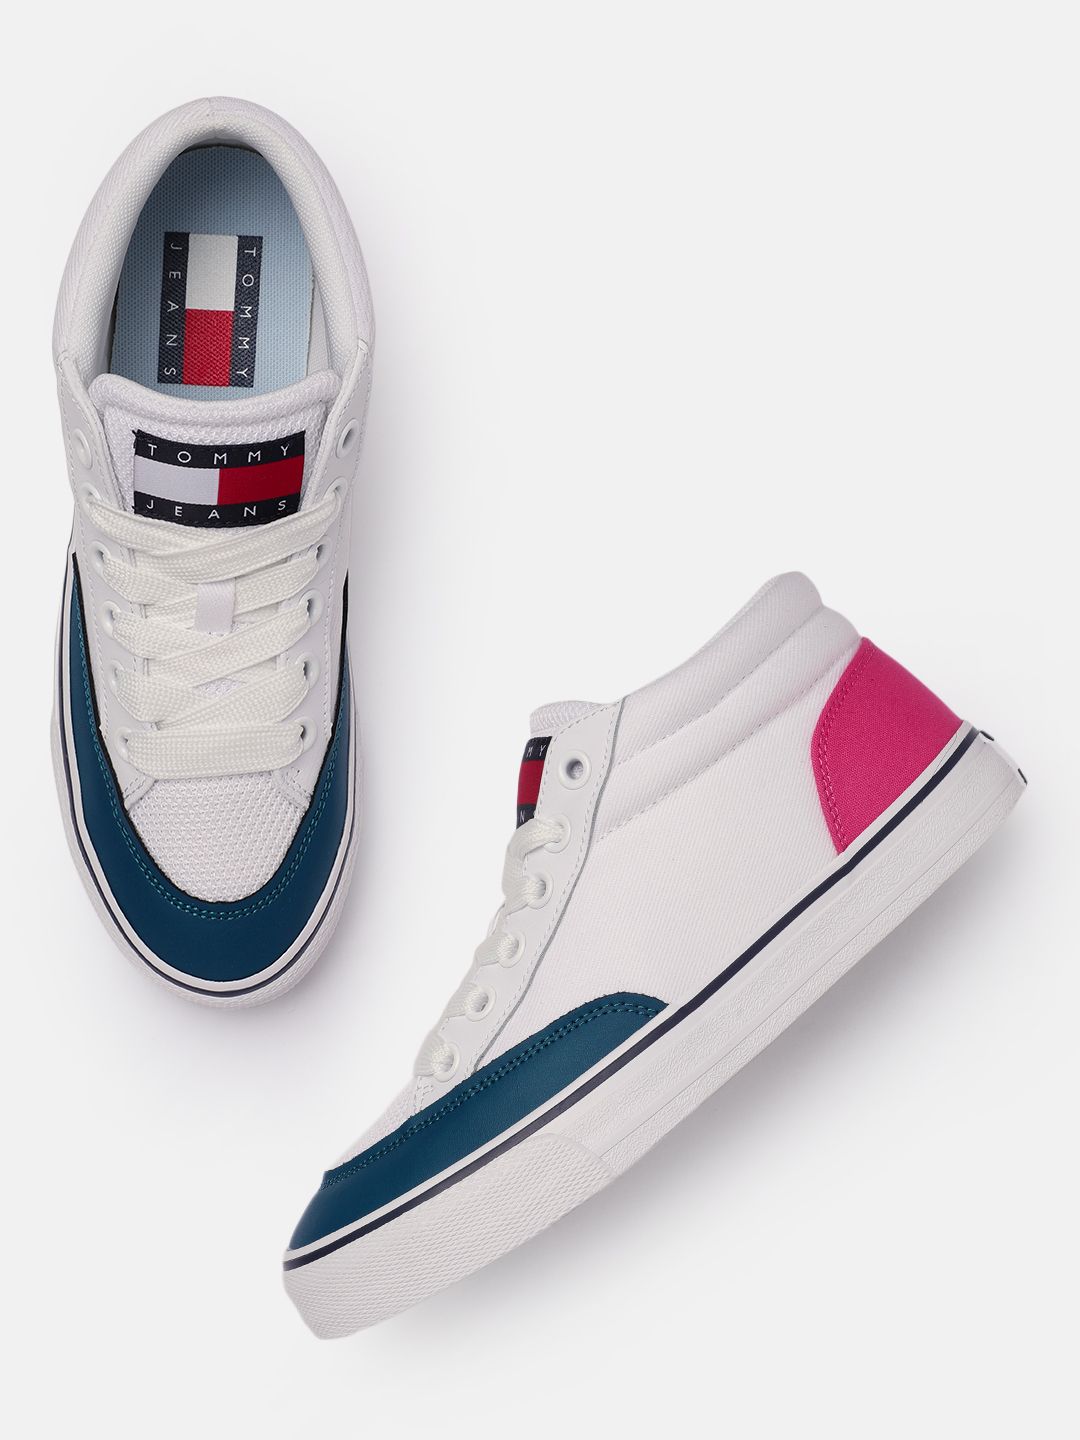 Tommy Hilfiger Women White Colourblocked Sneakers Price in India